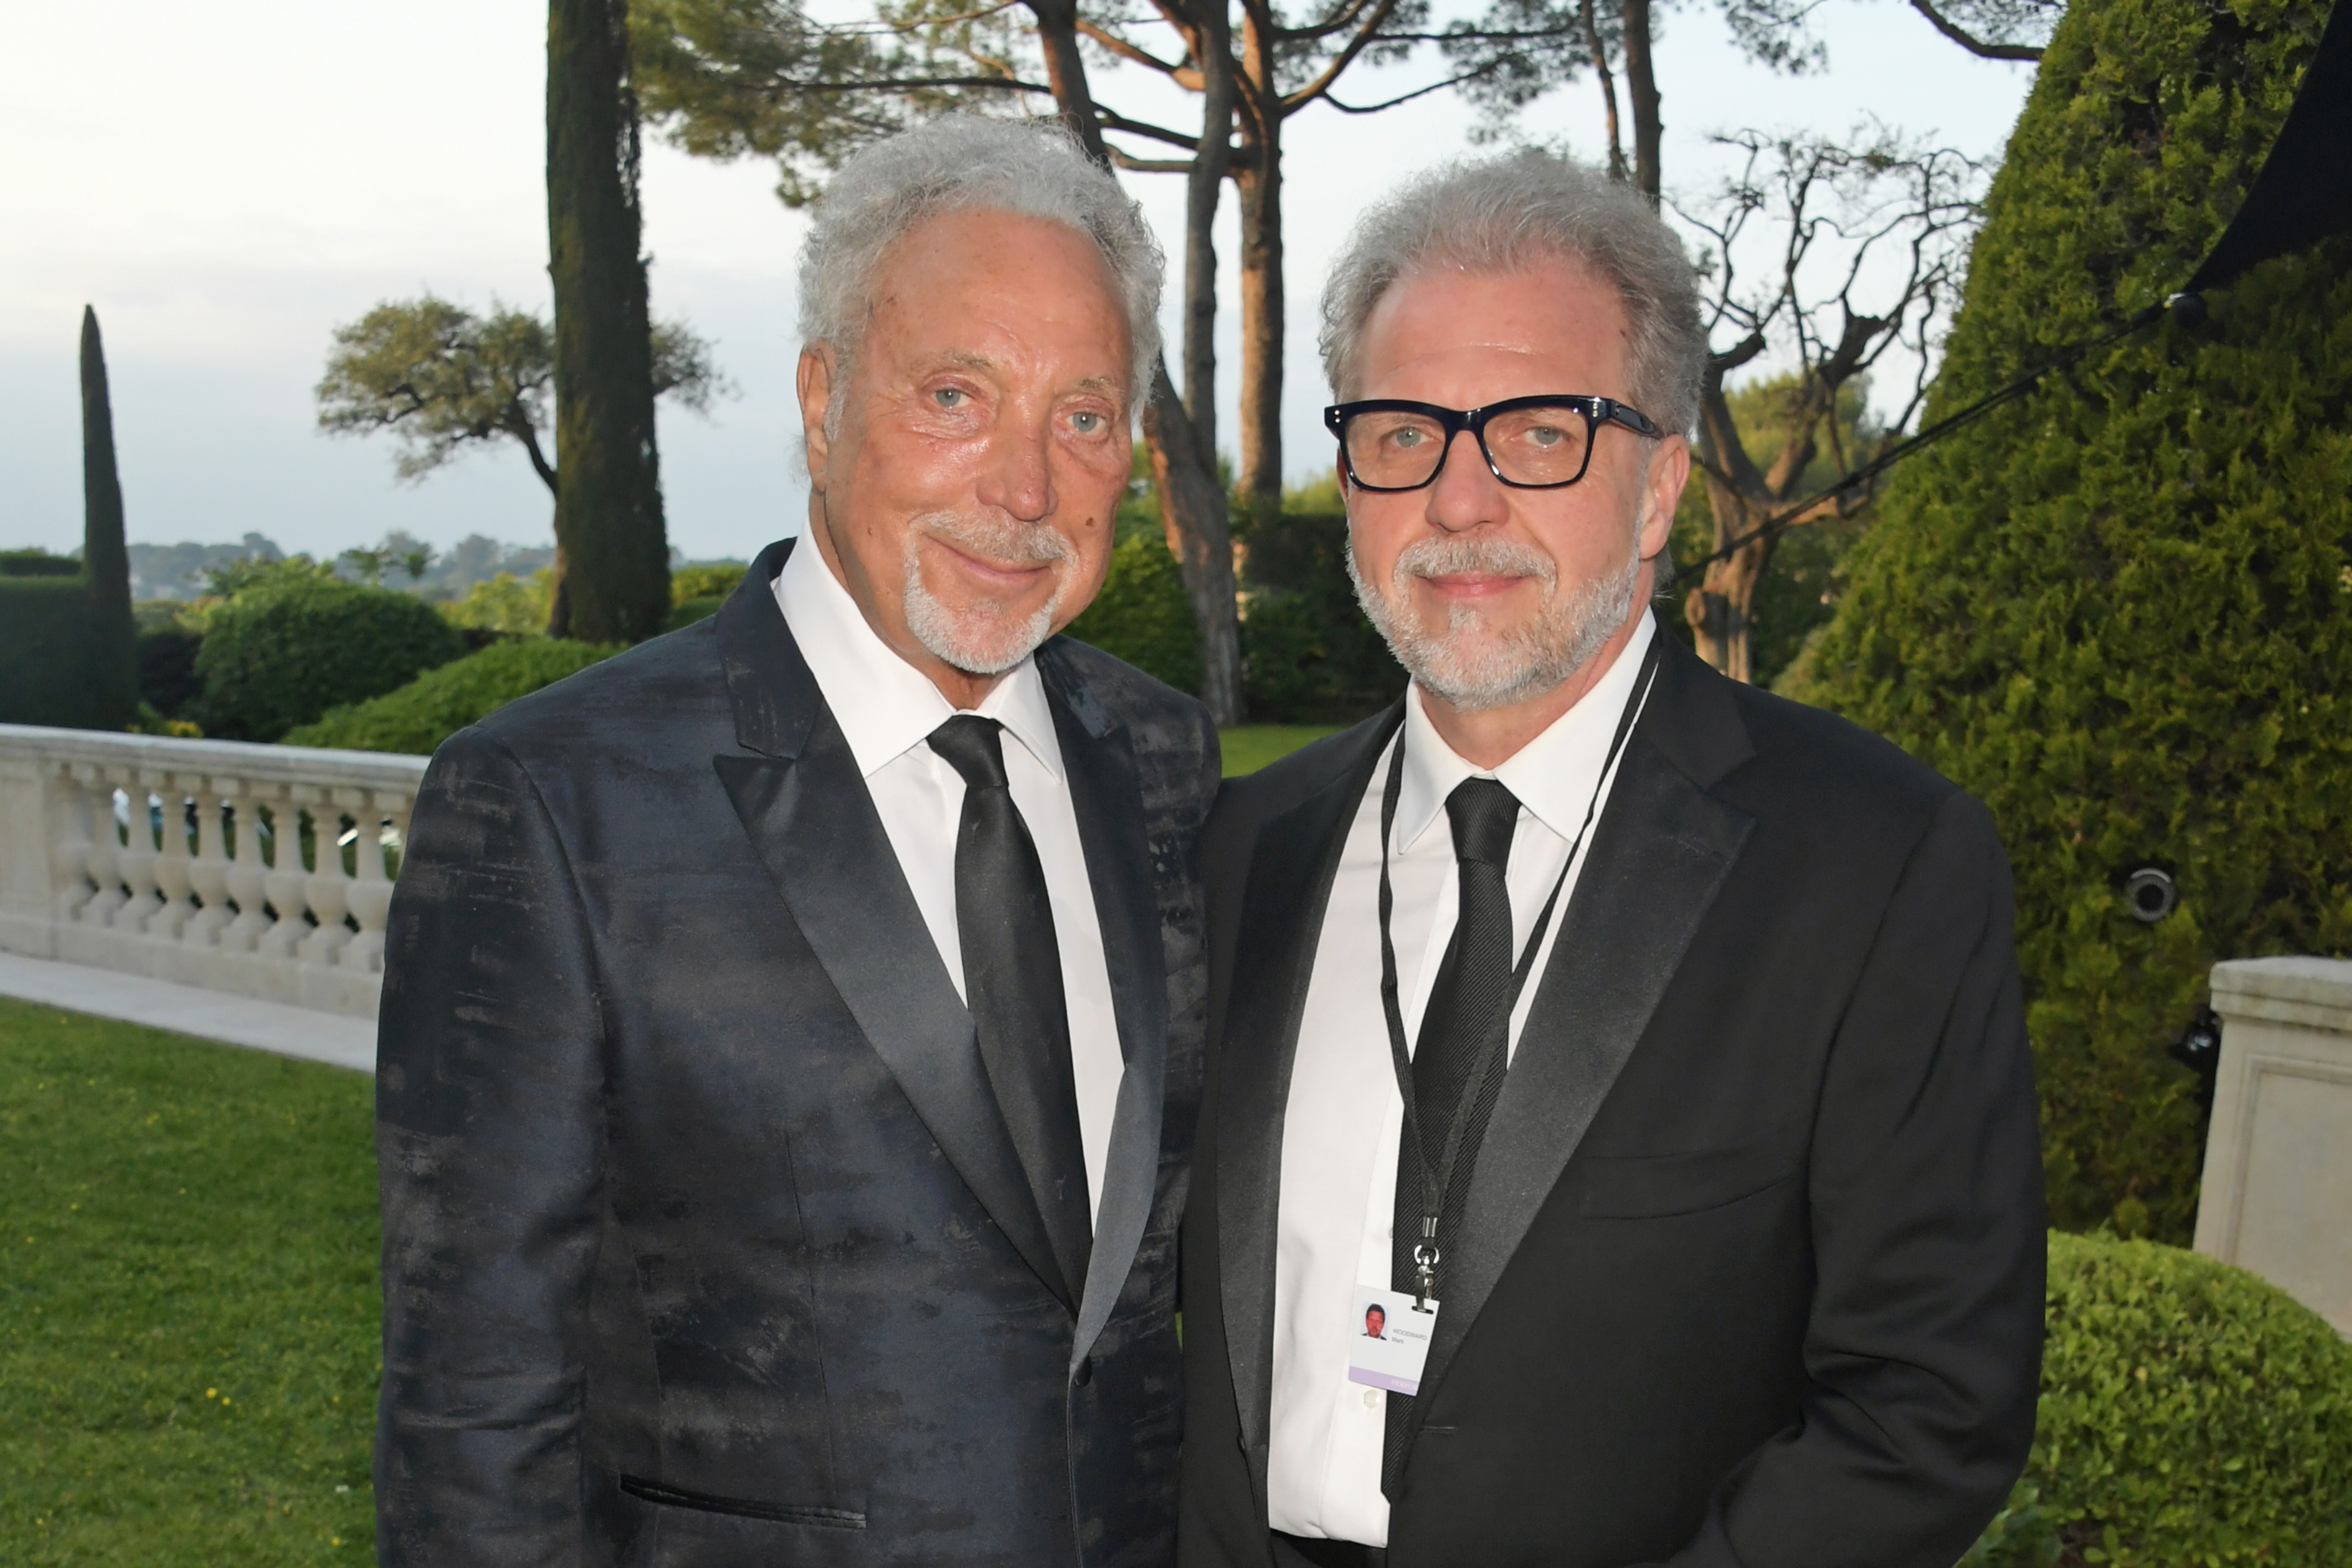 Tom Jones and Mark Jones attend the amfAR Cannes Gala 2019 at Hotel du Cap-Eden-Roc in Cap d'Antibes, France on May 23, 2019 | Source: Getty Images